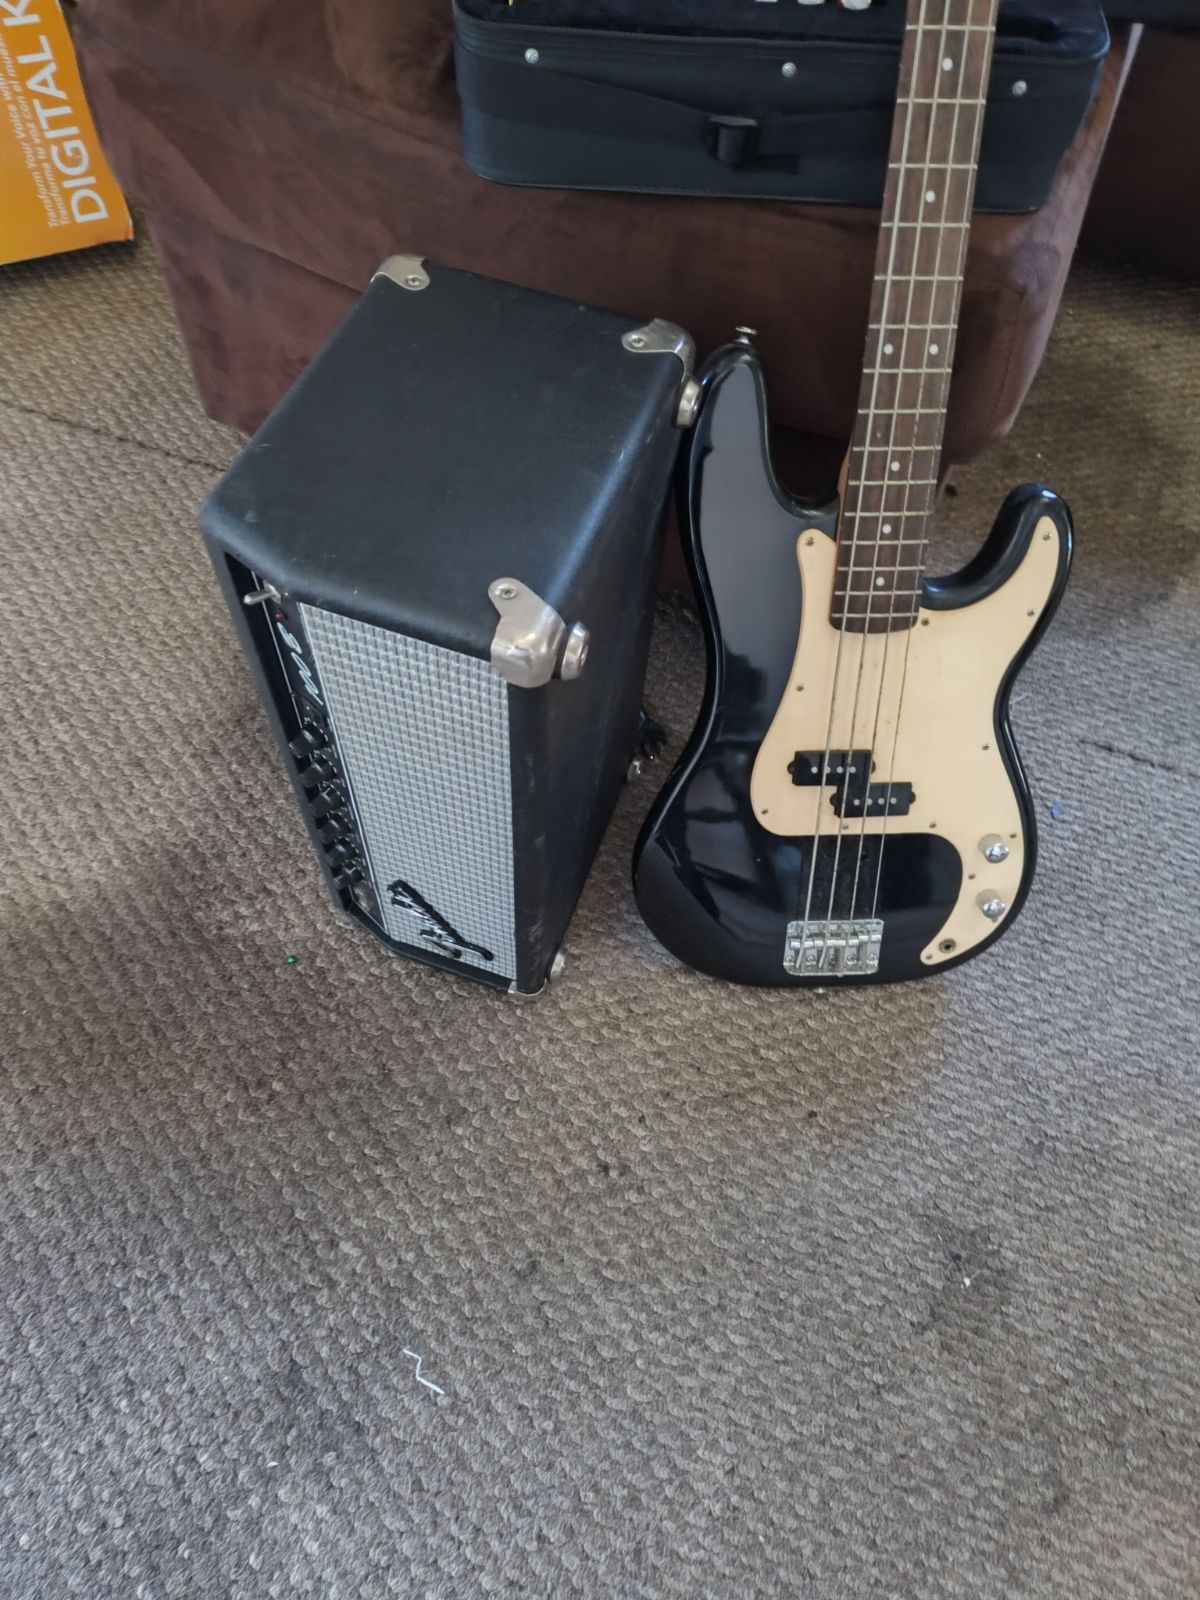 Bass Guitar And amp Fairly new 